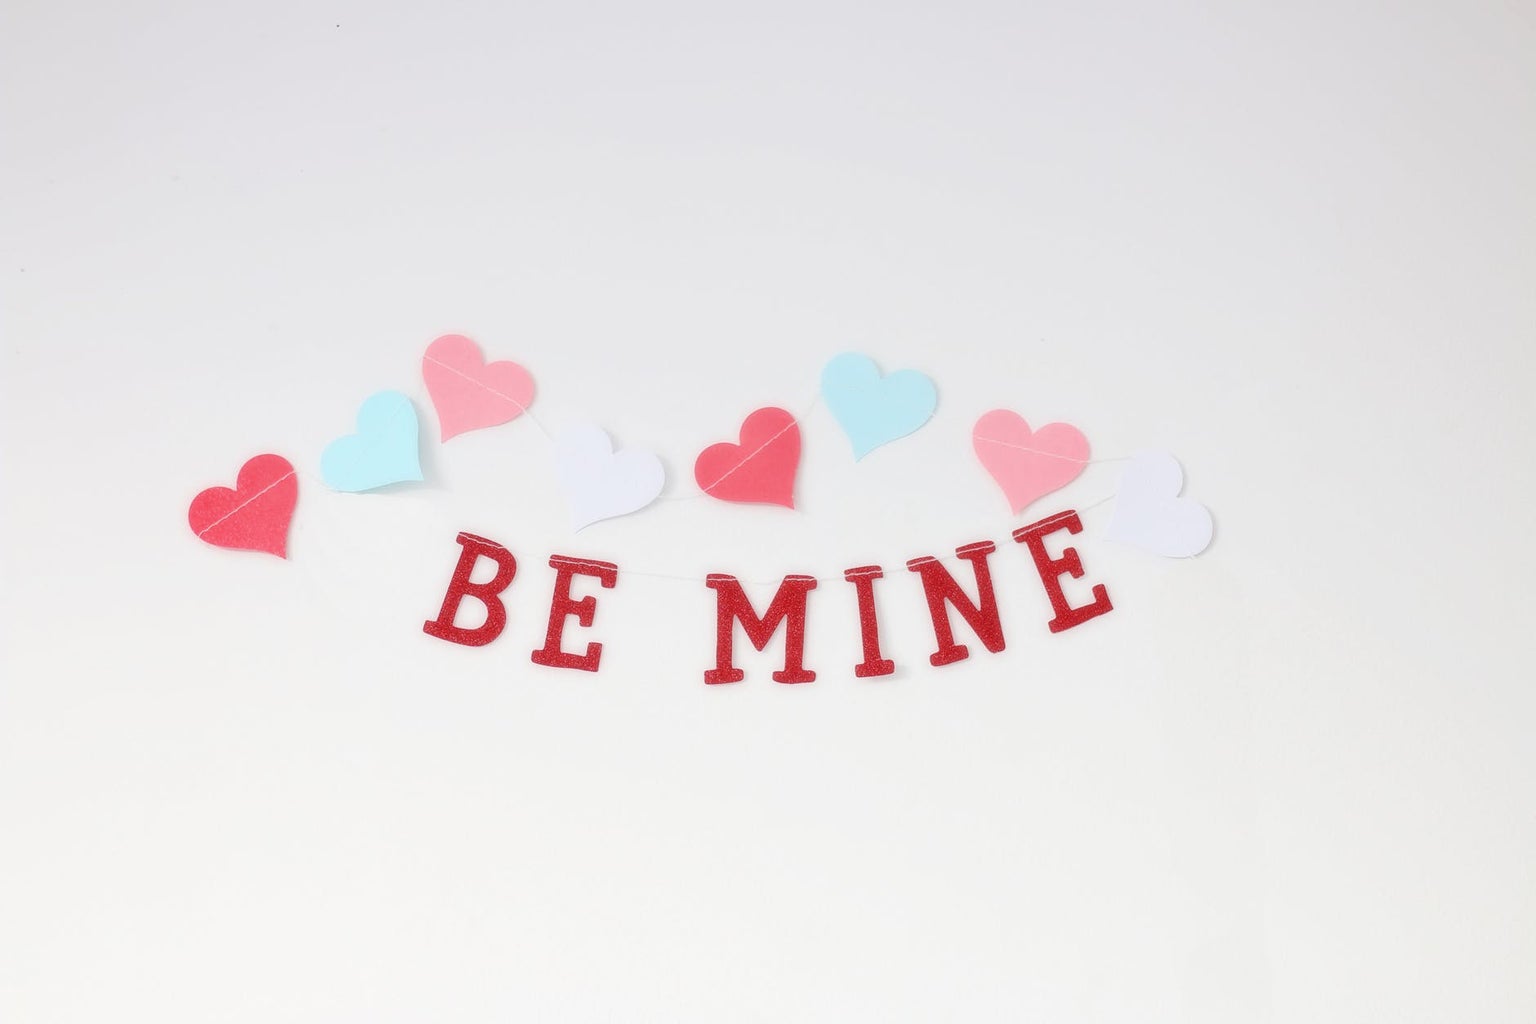 Be Mine banner for valentine's day